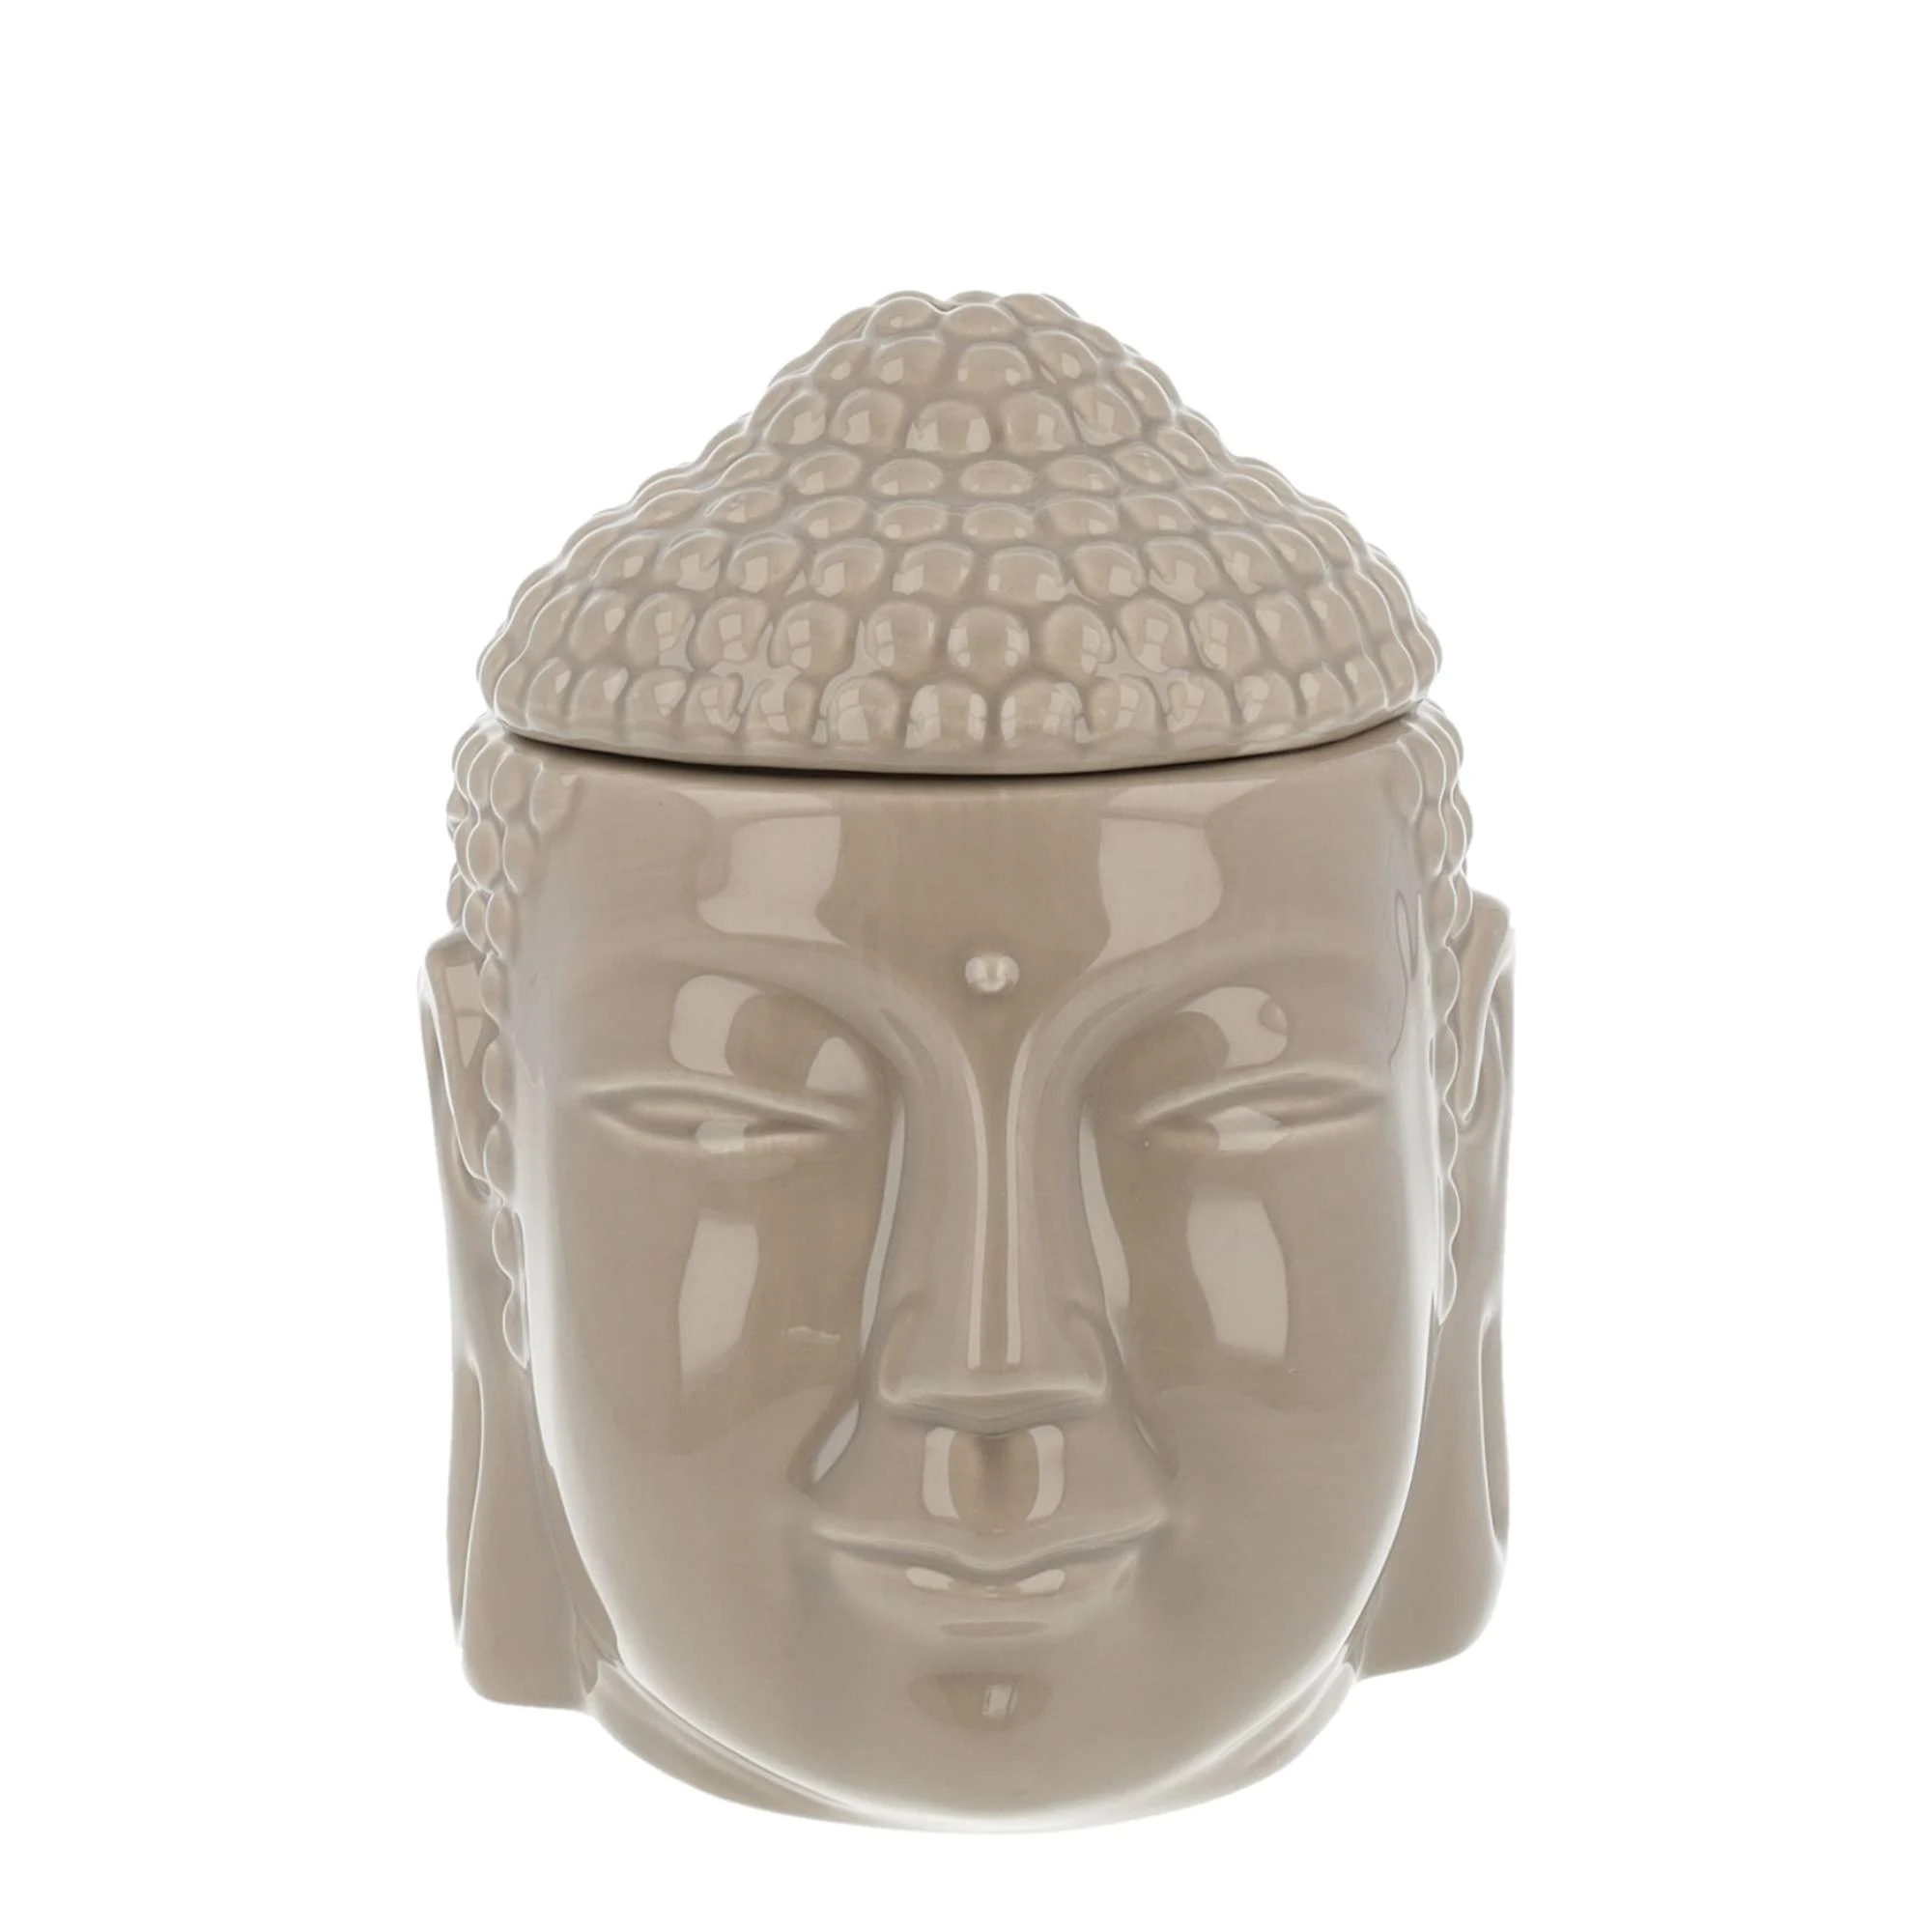 scentchips-buddha-head-taupe-scented-wax-burner